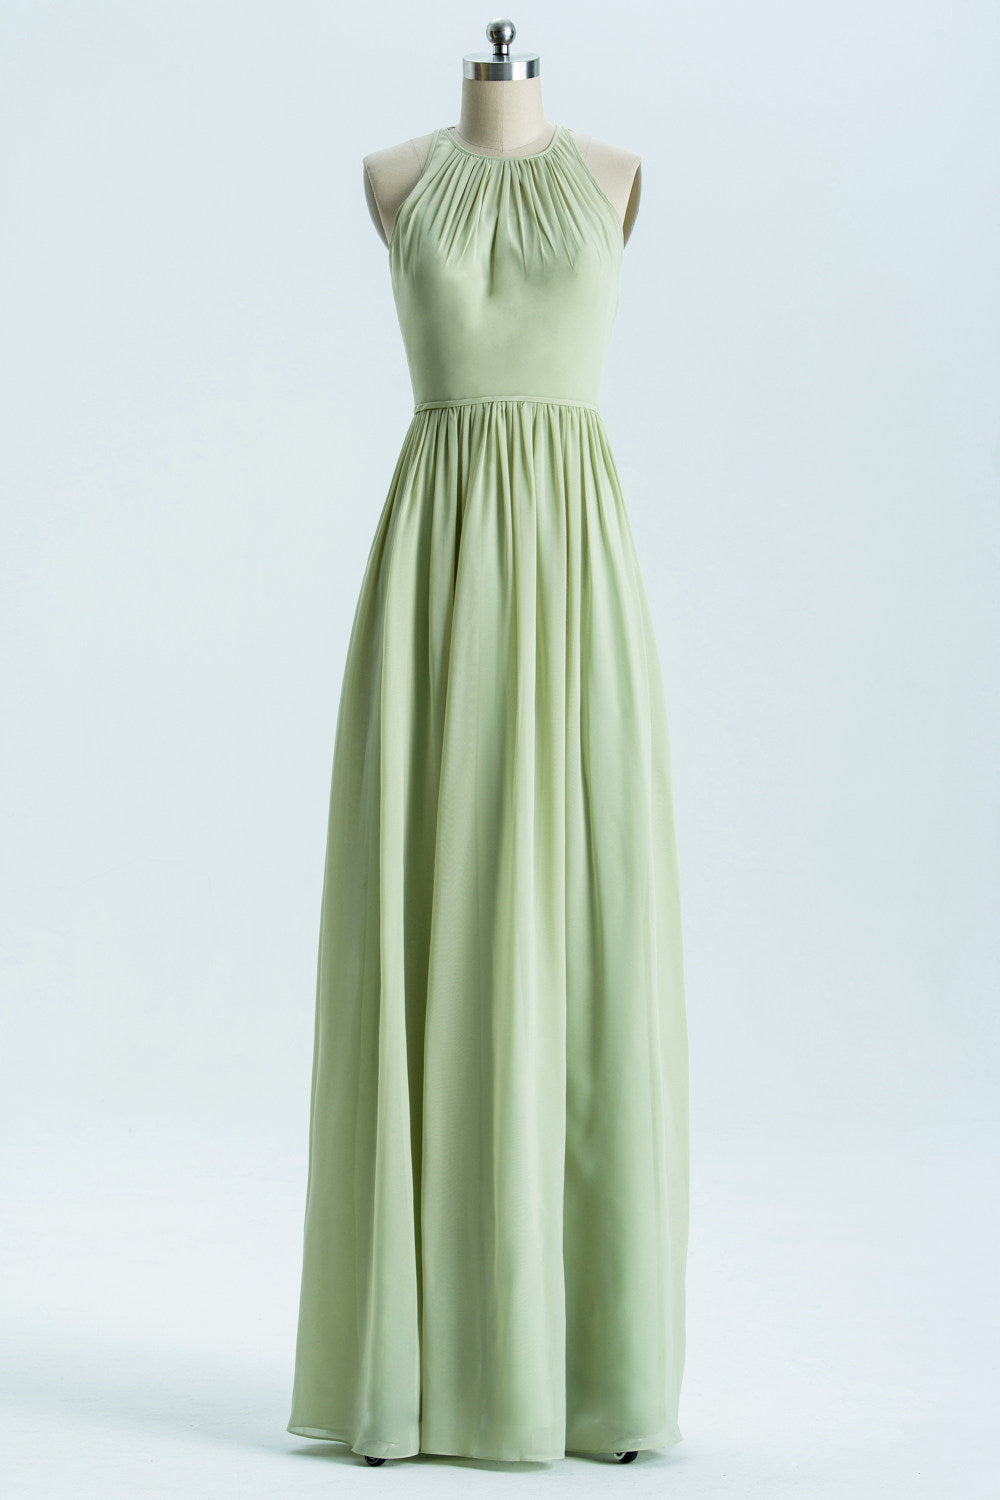 Go Out Outfit, Sage Green Chiffon High Neck Long Bridesmaid Dress